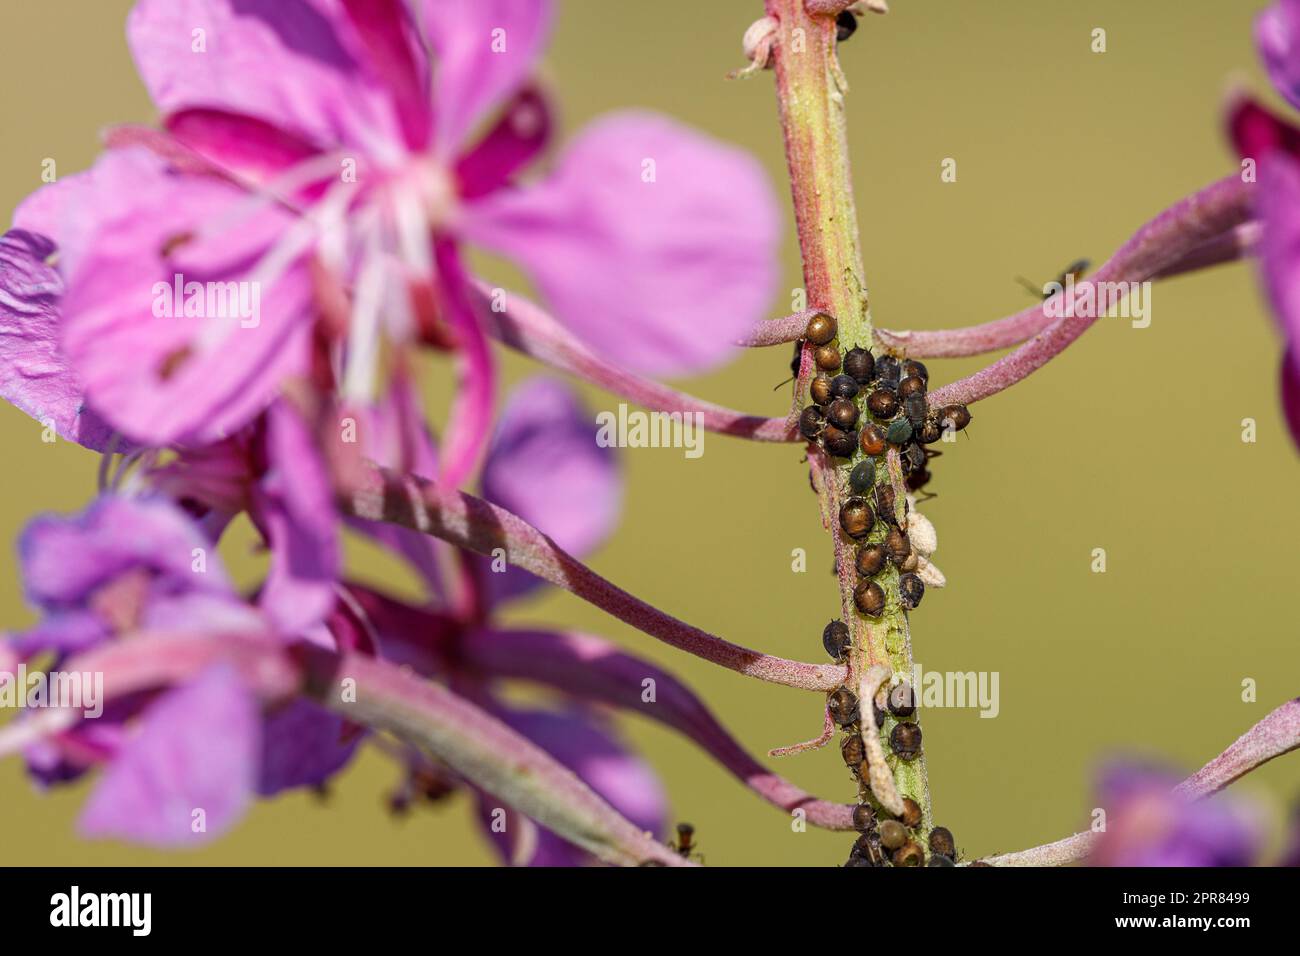 Aphid pest on flowers Stock Photo